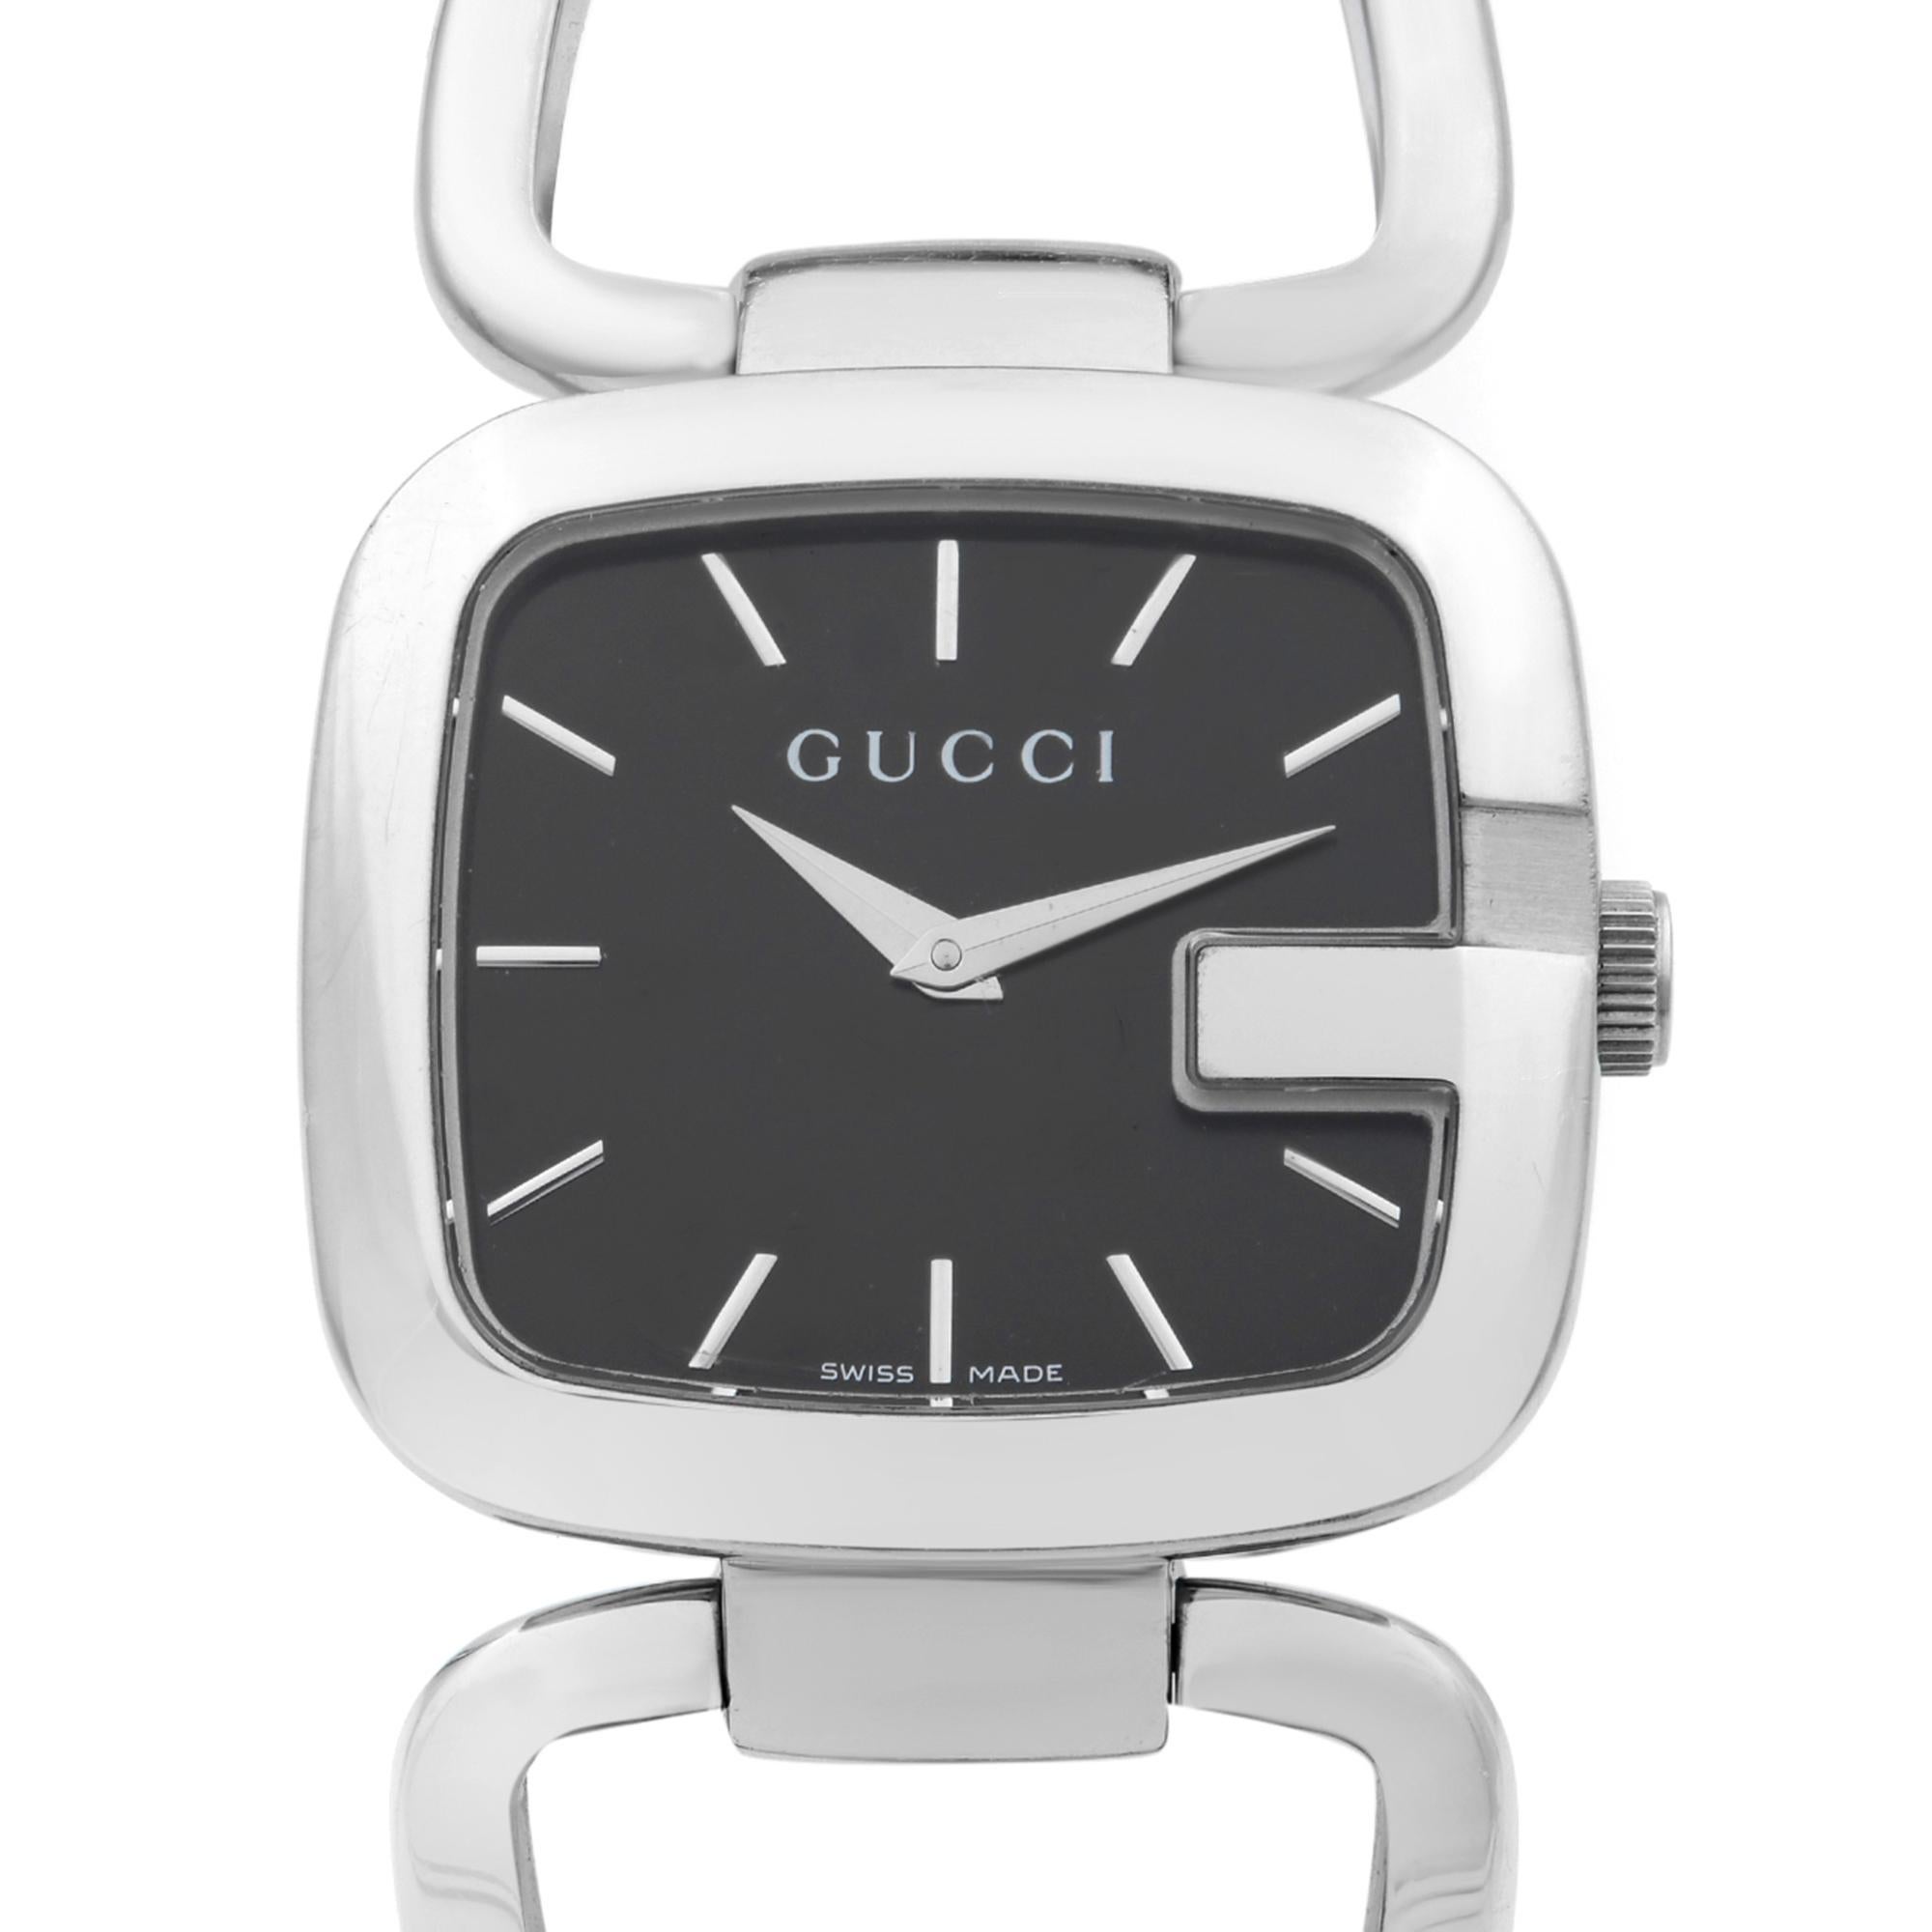 This pre-owned Gucci 125 YA125407 is a beautiful Ladie's timepiece that is powered by quartz (battery) movement which is cased in a stainless steel case. It has a  rectangle shape face,  dial and has hand sticks style markers. It is completed with a